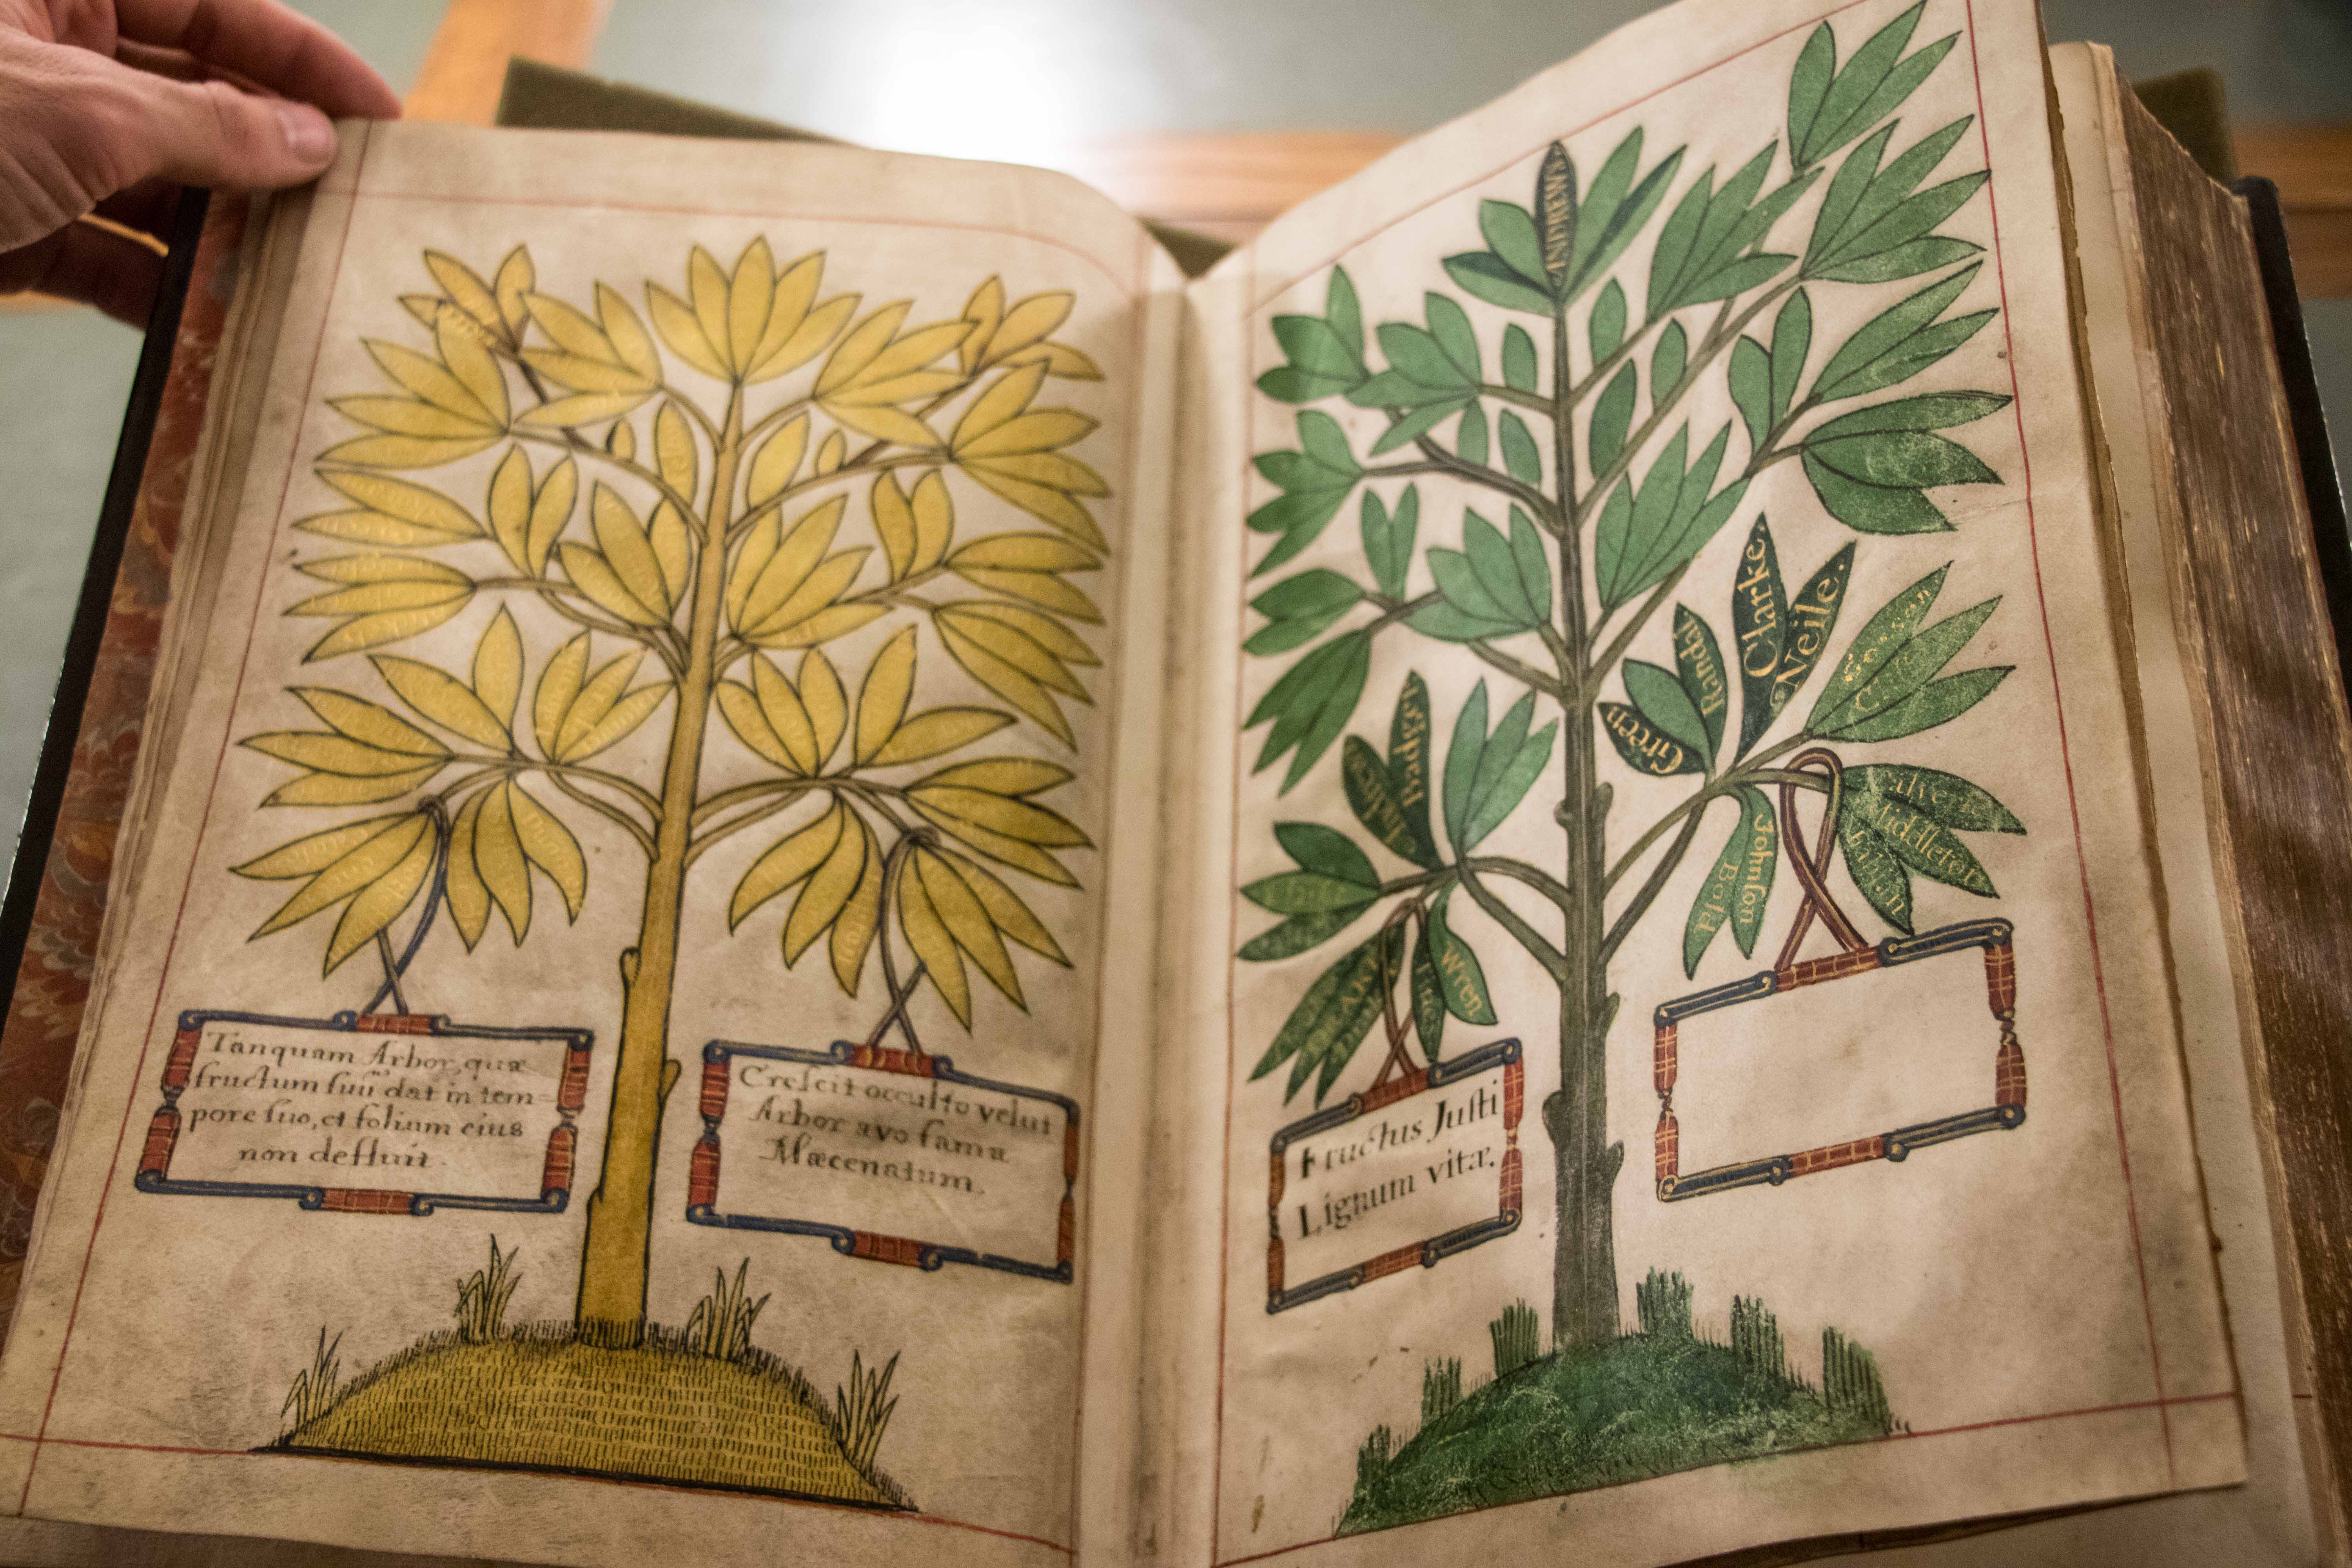 Open spread of teh book, showing dead benefctors names on a tree with yellow leaves on the left-hand page, and living benefactors' names on green leaves of a tree on the right-hand page